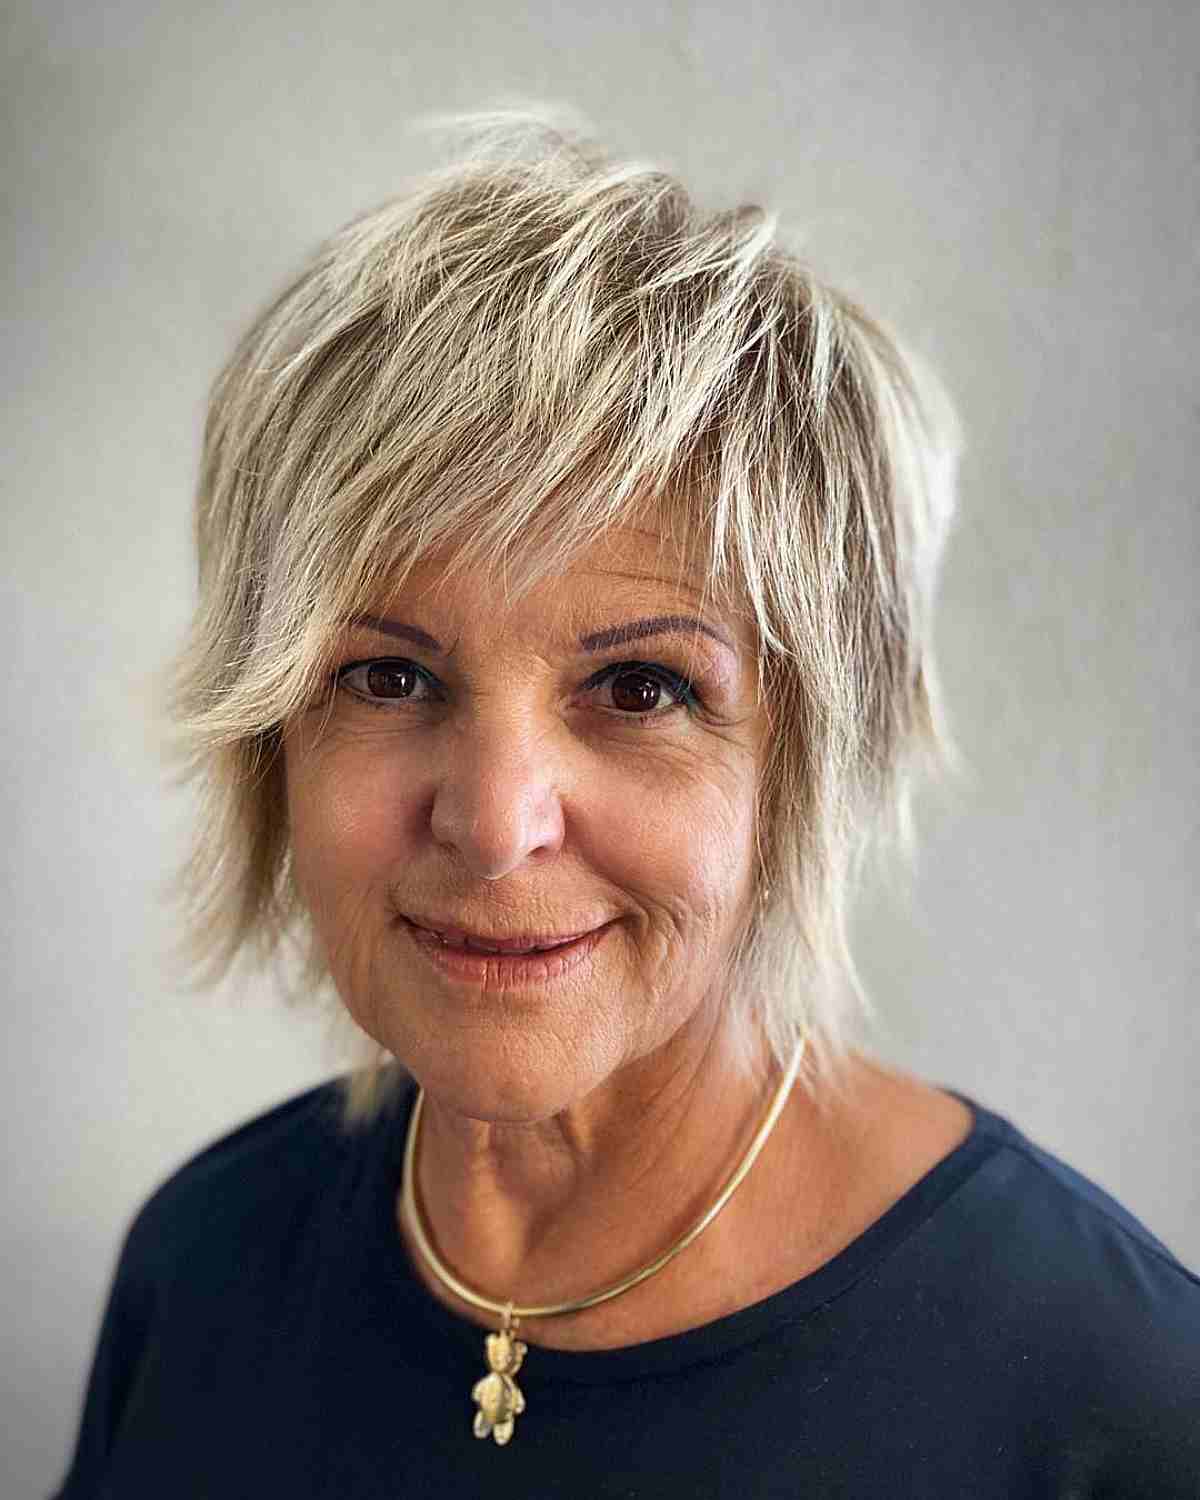 Jagged Shaggy Mullet Bob with Side-Swept Bangs for Ladies Over 70